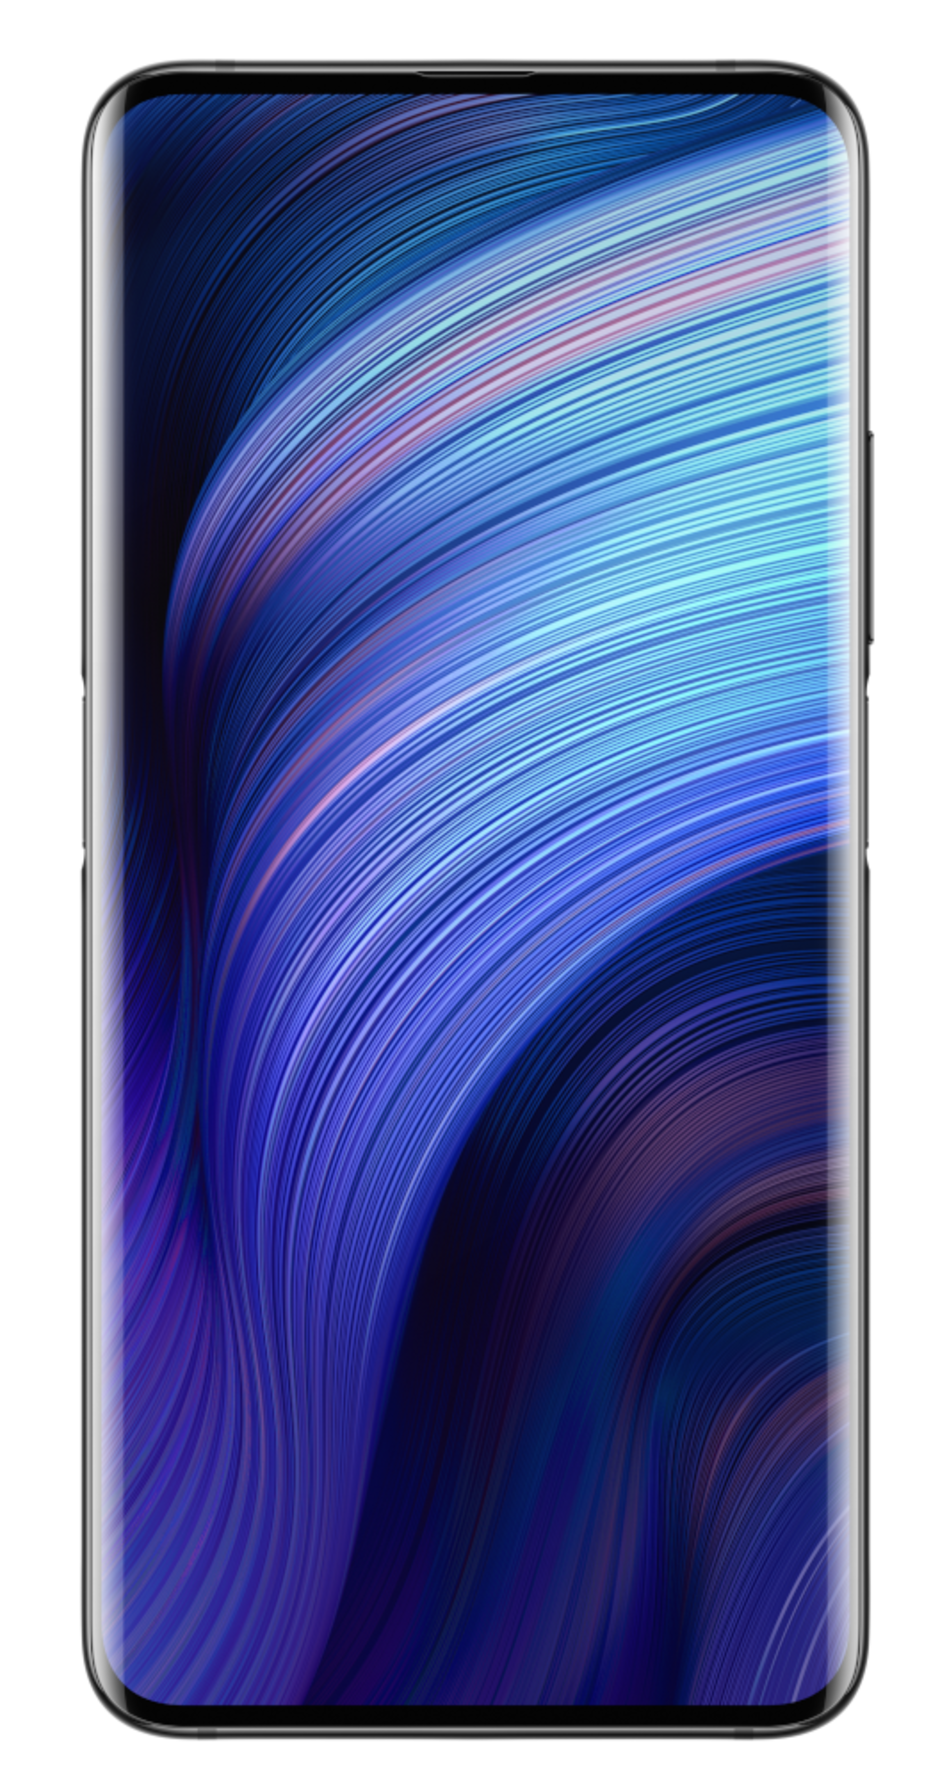 Nubia Z20 - Nubia's new dual-screen Z20 smartphone coming to the US in September